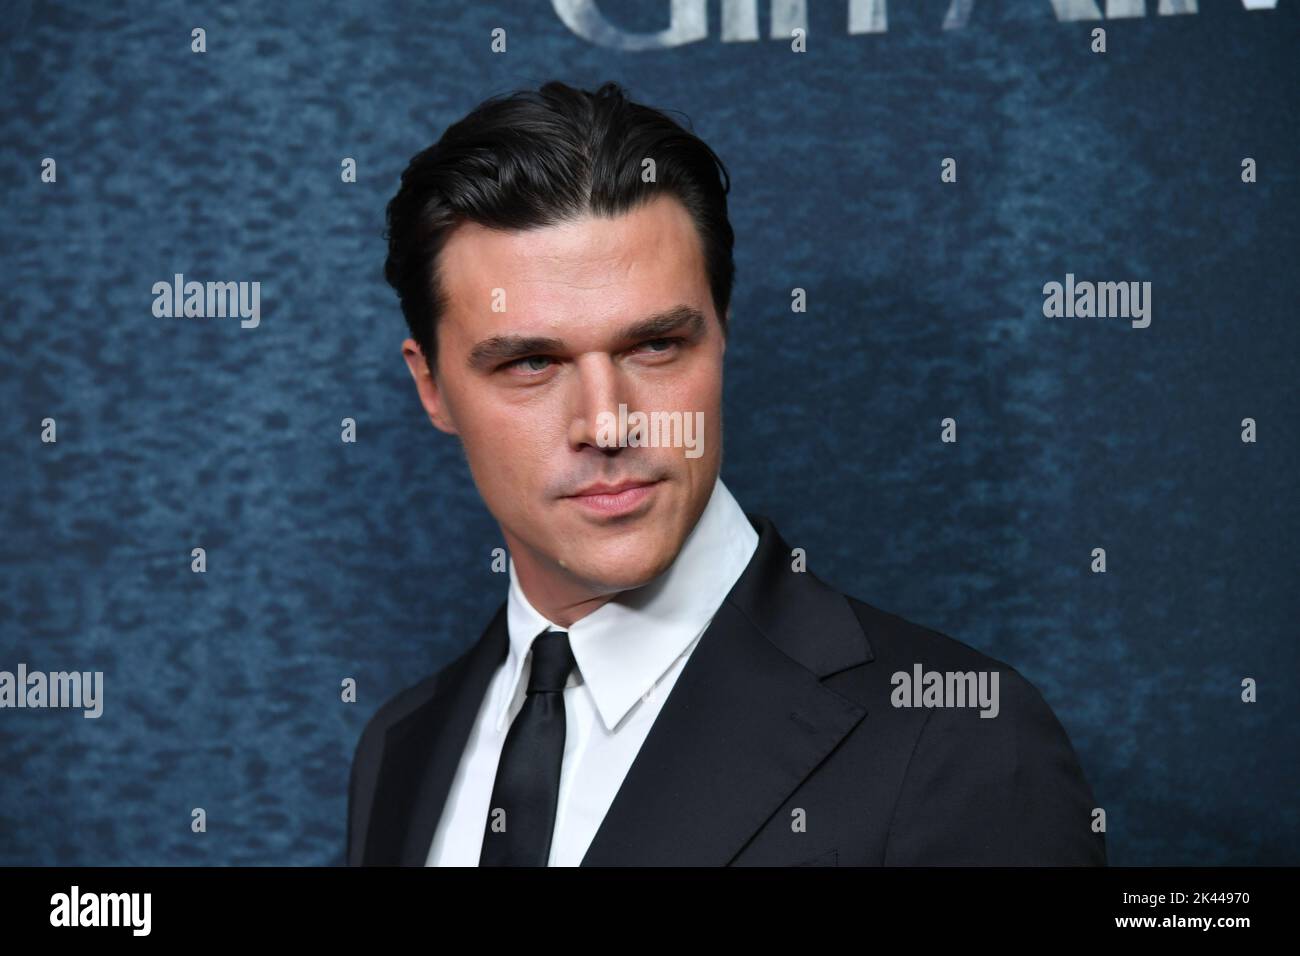 Finn Wittrock attends Netflix's 'Luckiest Girl Alive' premiere at Paris Theater on September 29, 2022 in New York City. Stock Photo